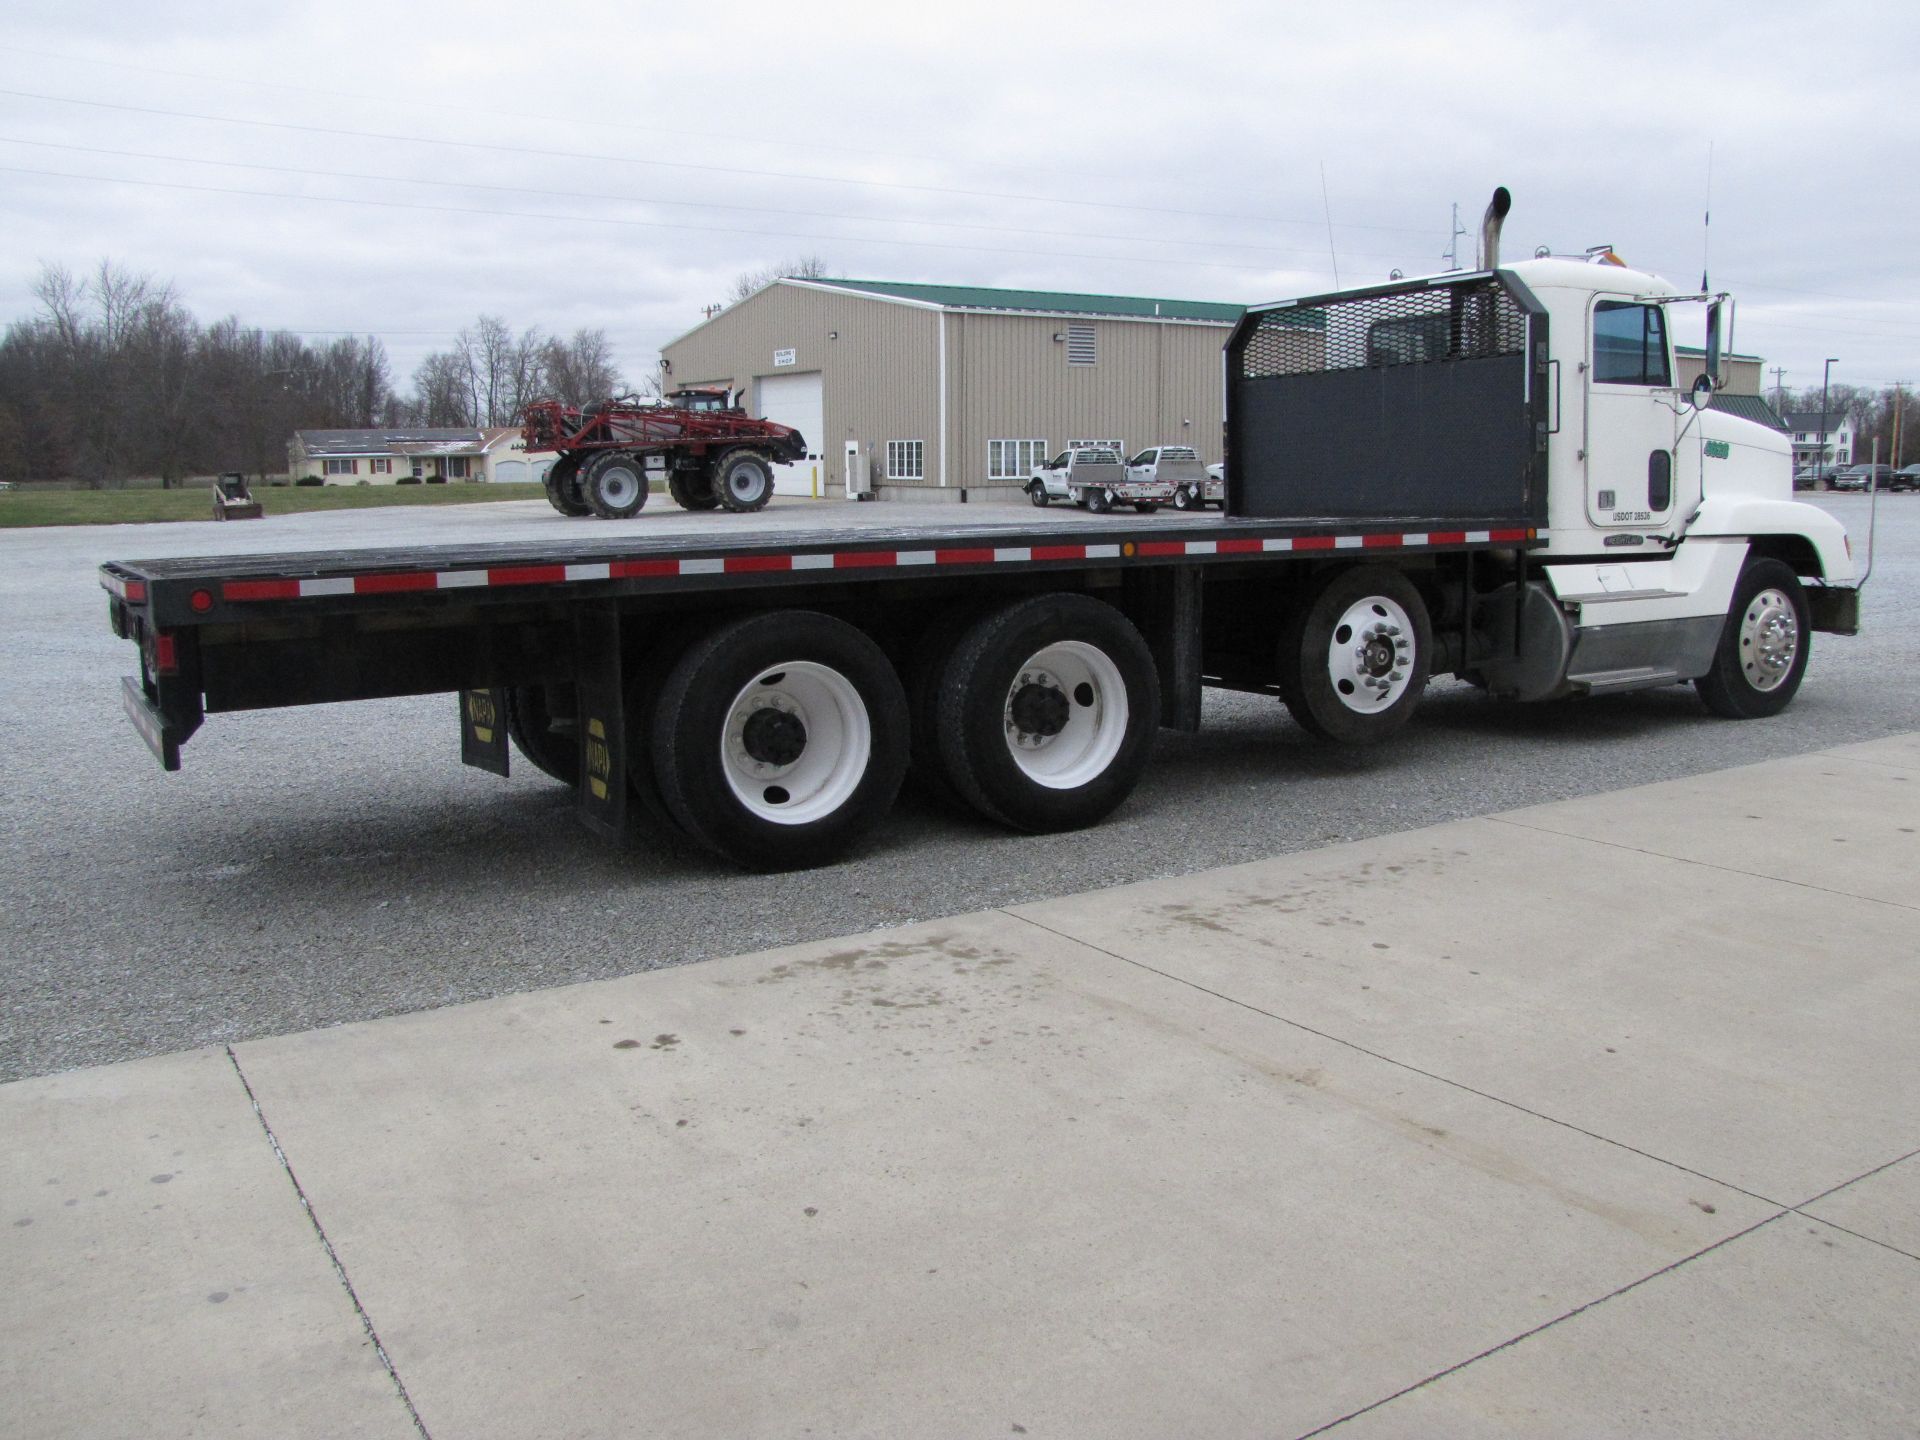 1993 Freightliner FLD120 semi truck - Image 11 of 71